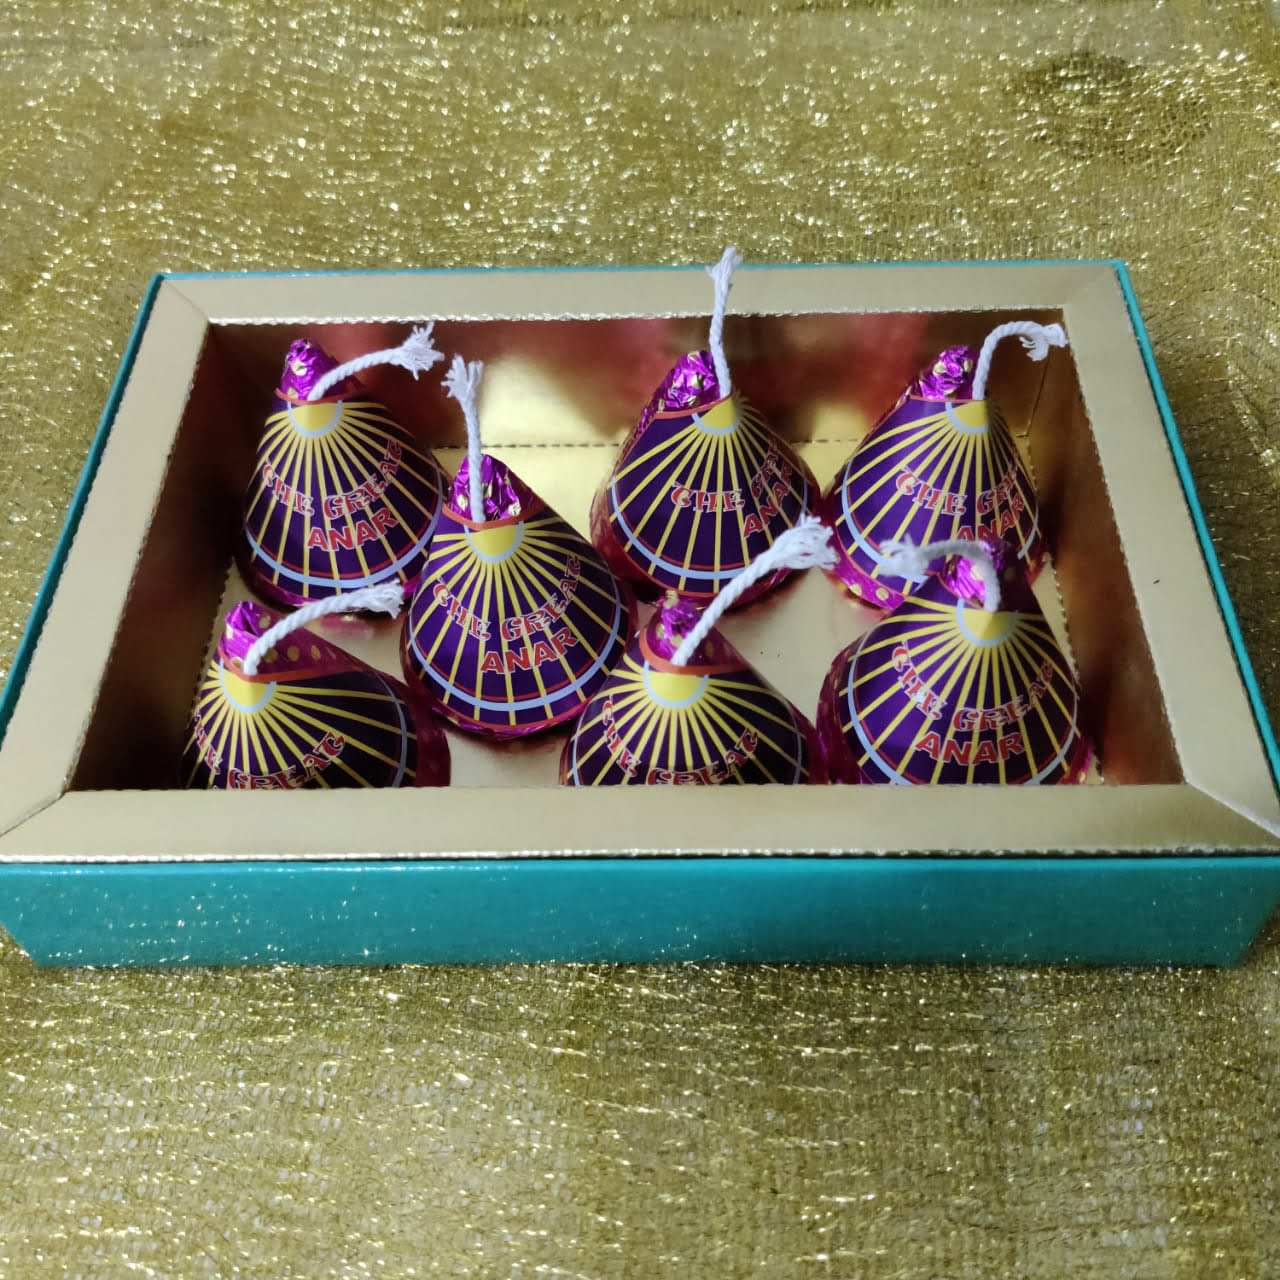 Diwali Gifts - Buy Online Diwali Gift Hampers to India - India Gifts Point